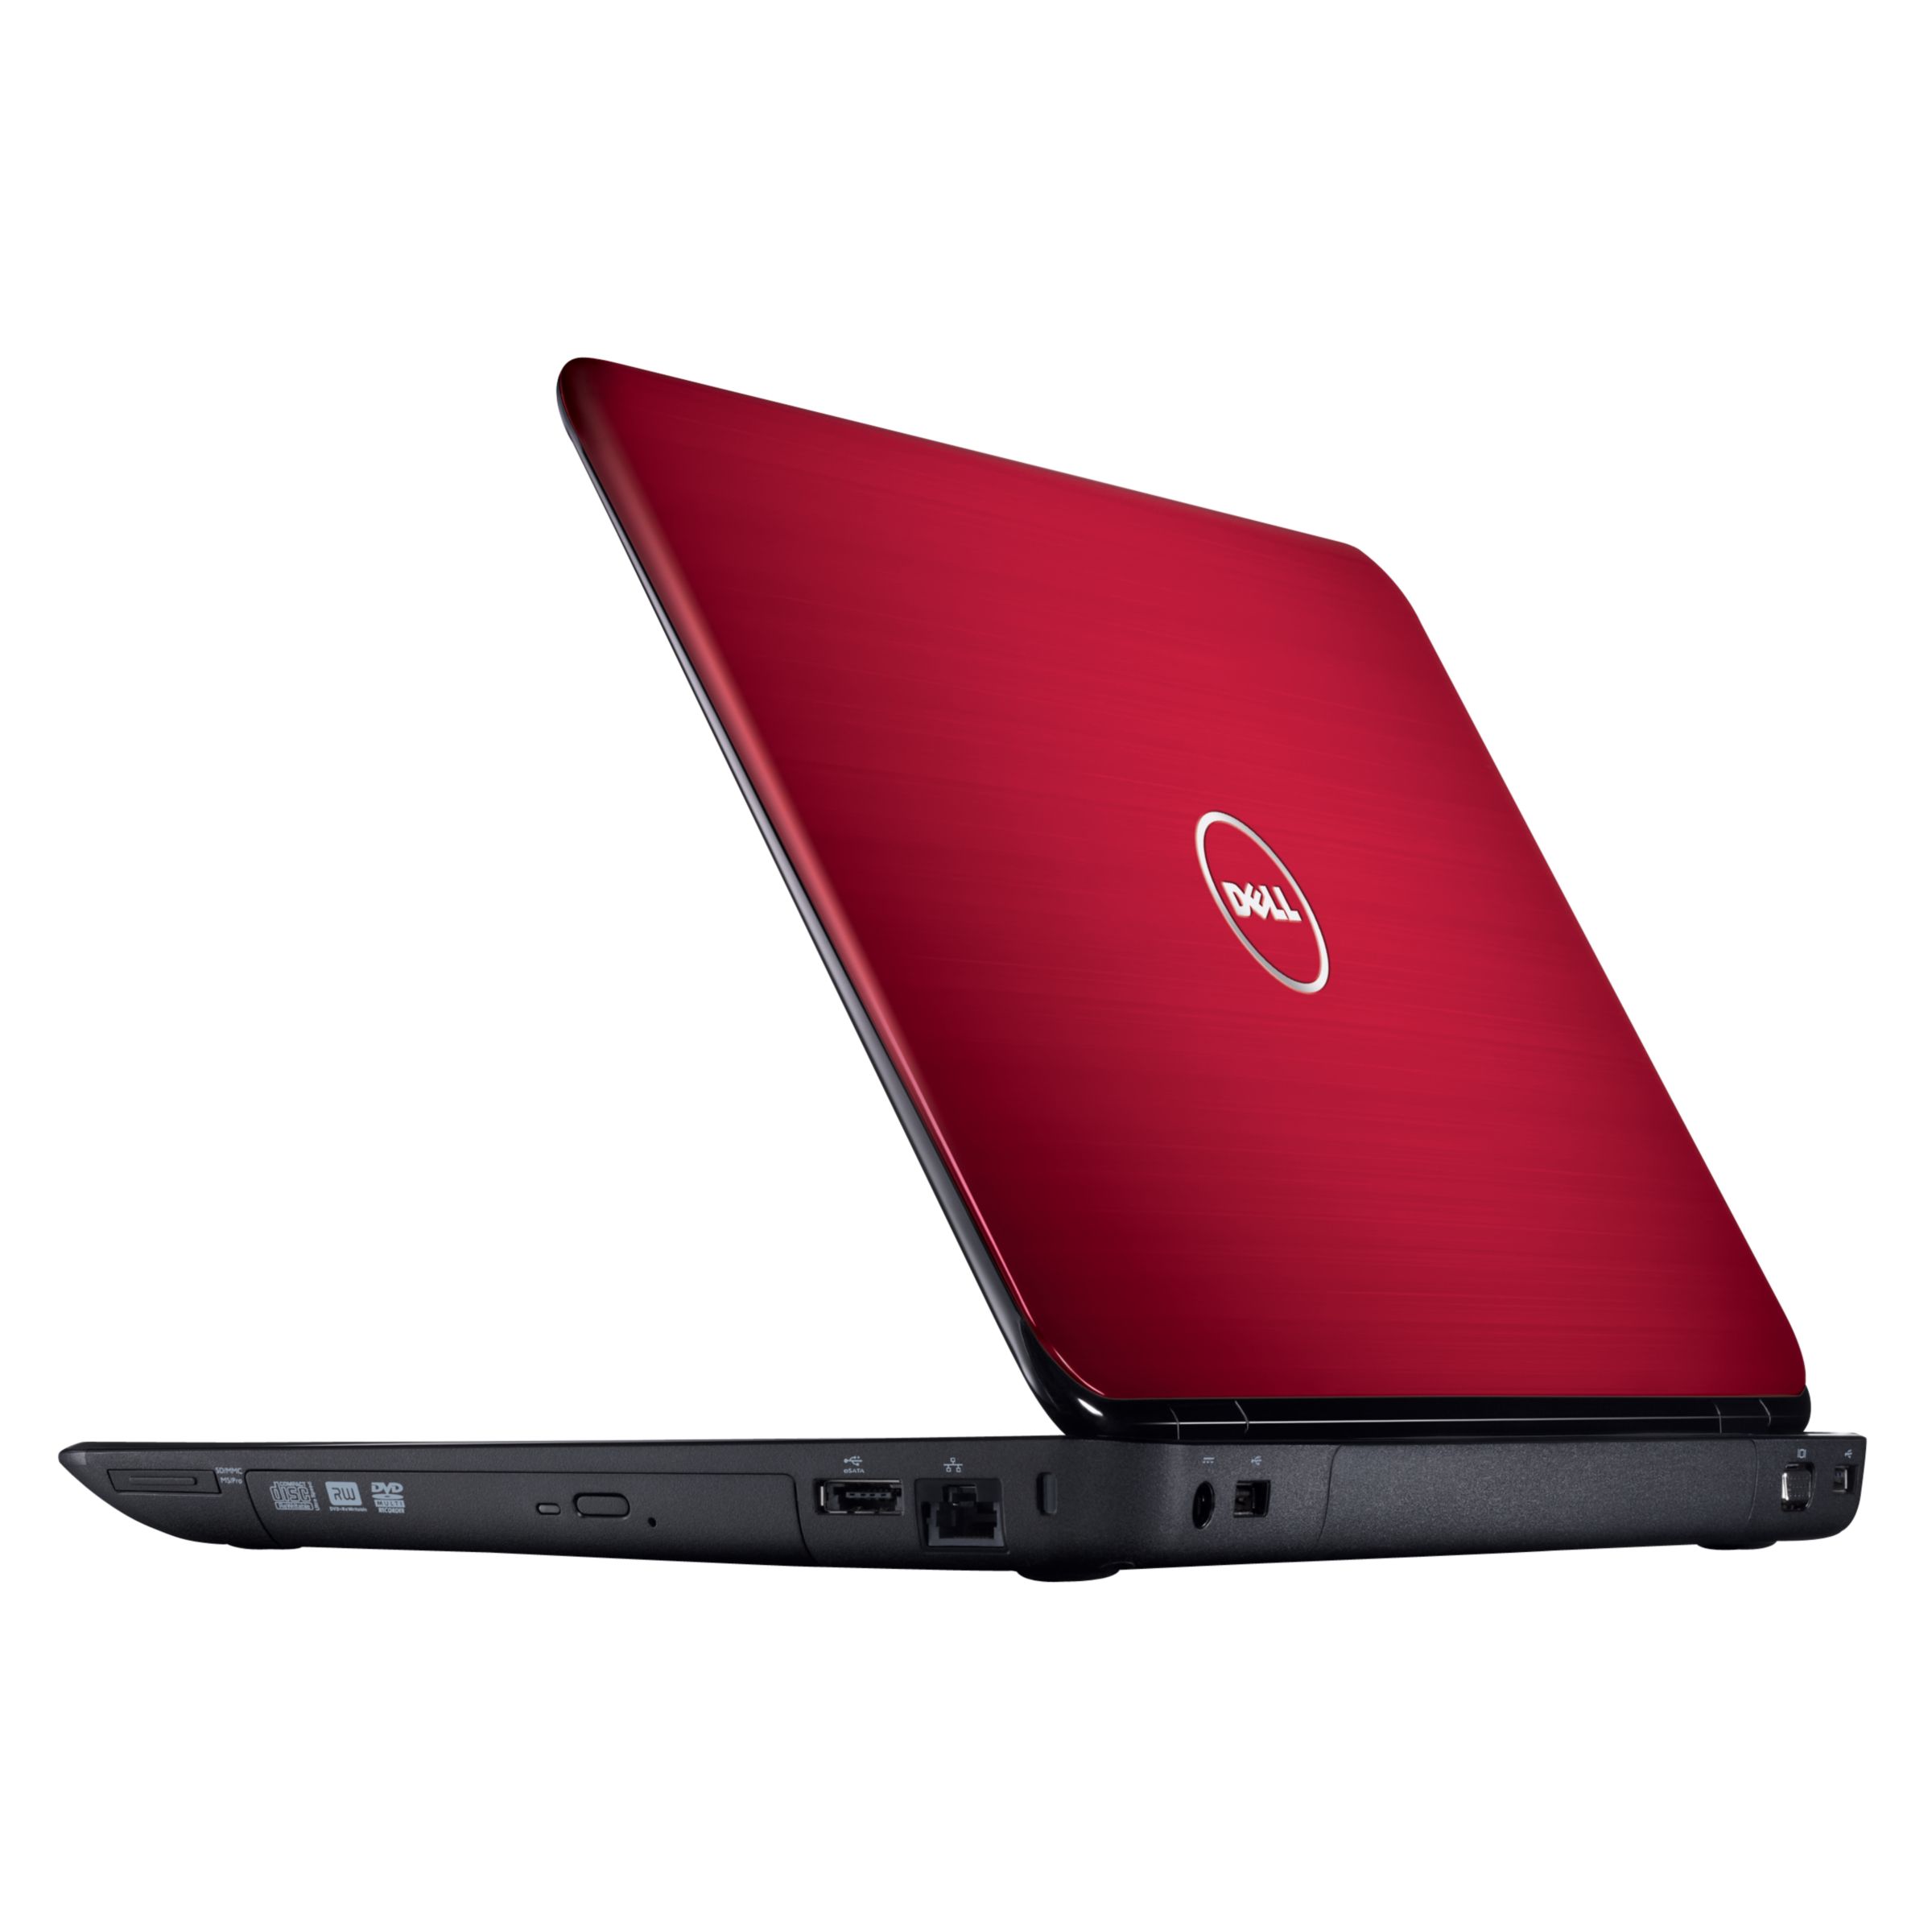 Dell Inspiron 15R Laptop, Intel Core i3, 500GB, 2.4GHz, 4GB RAM with 15.6 Inch Display at John Lewis